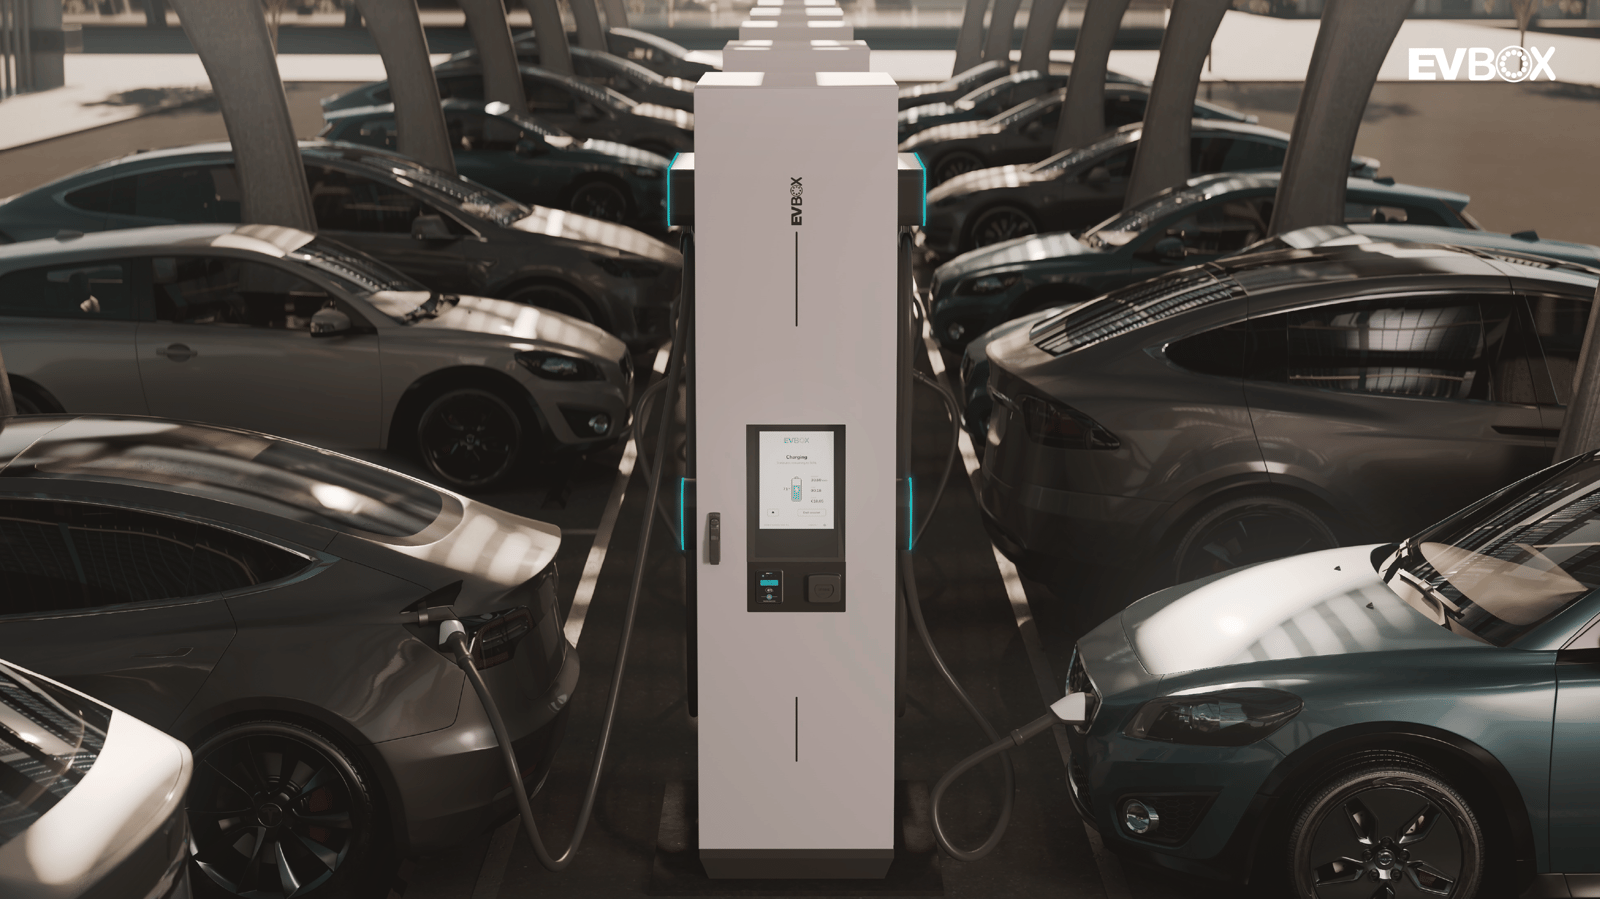 EVBox Troniq Modular DC fast charging station in an underground and busy car park.